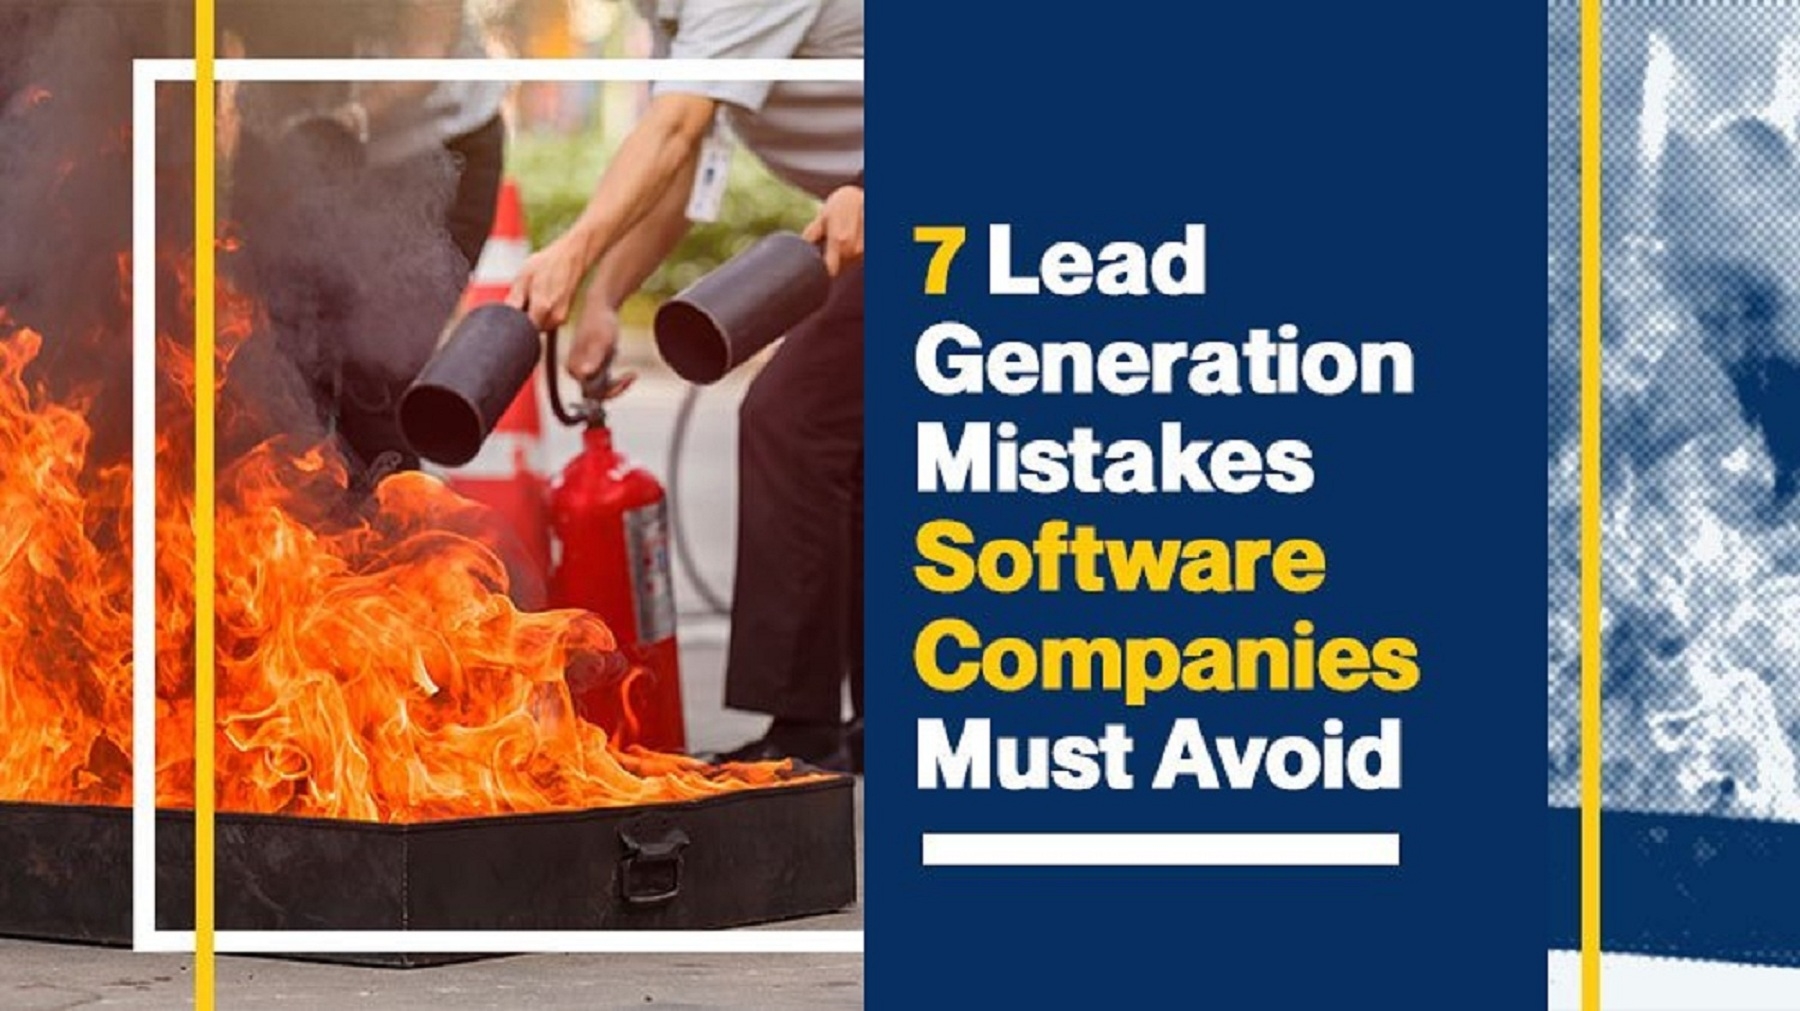 7 Lead Generation Mistakes Software Companies Must Avoid